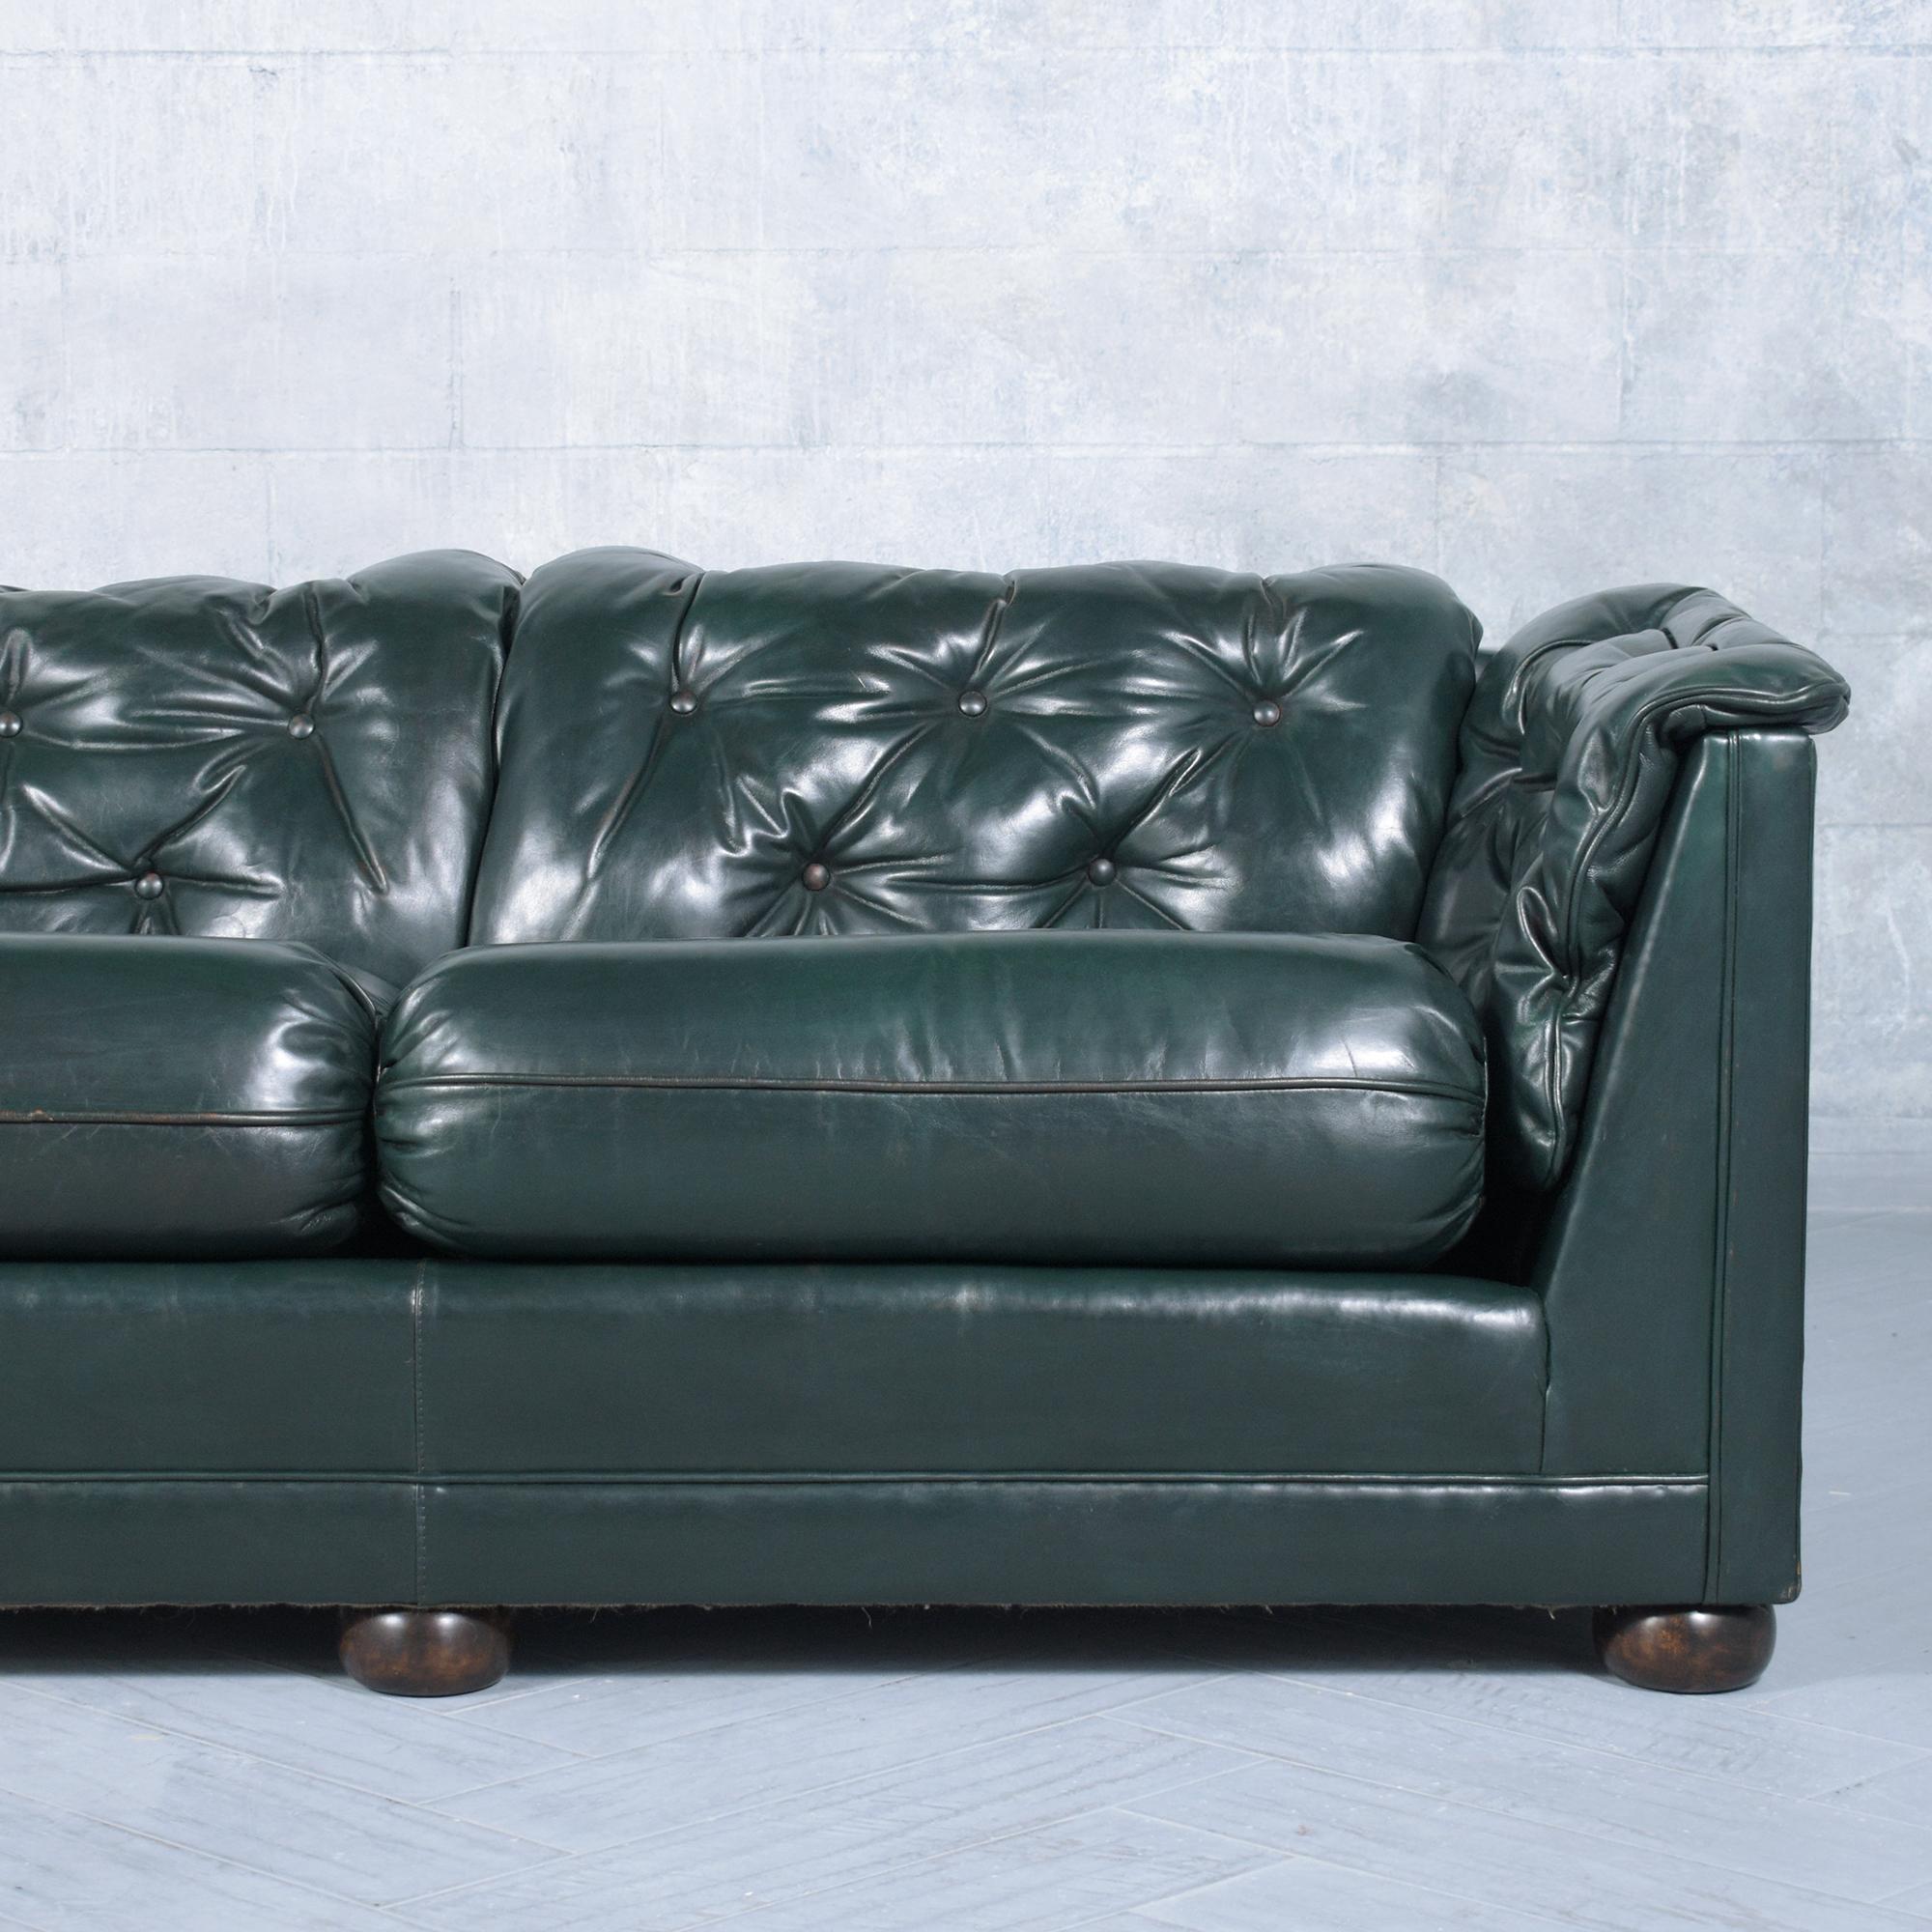 1960s Vintage Emerald Green Tufted Chesterfield Leather Sofa 3